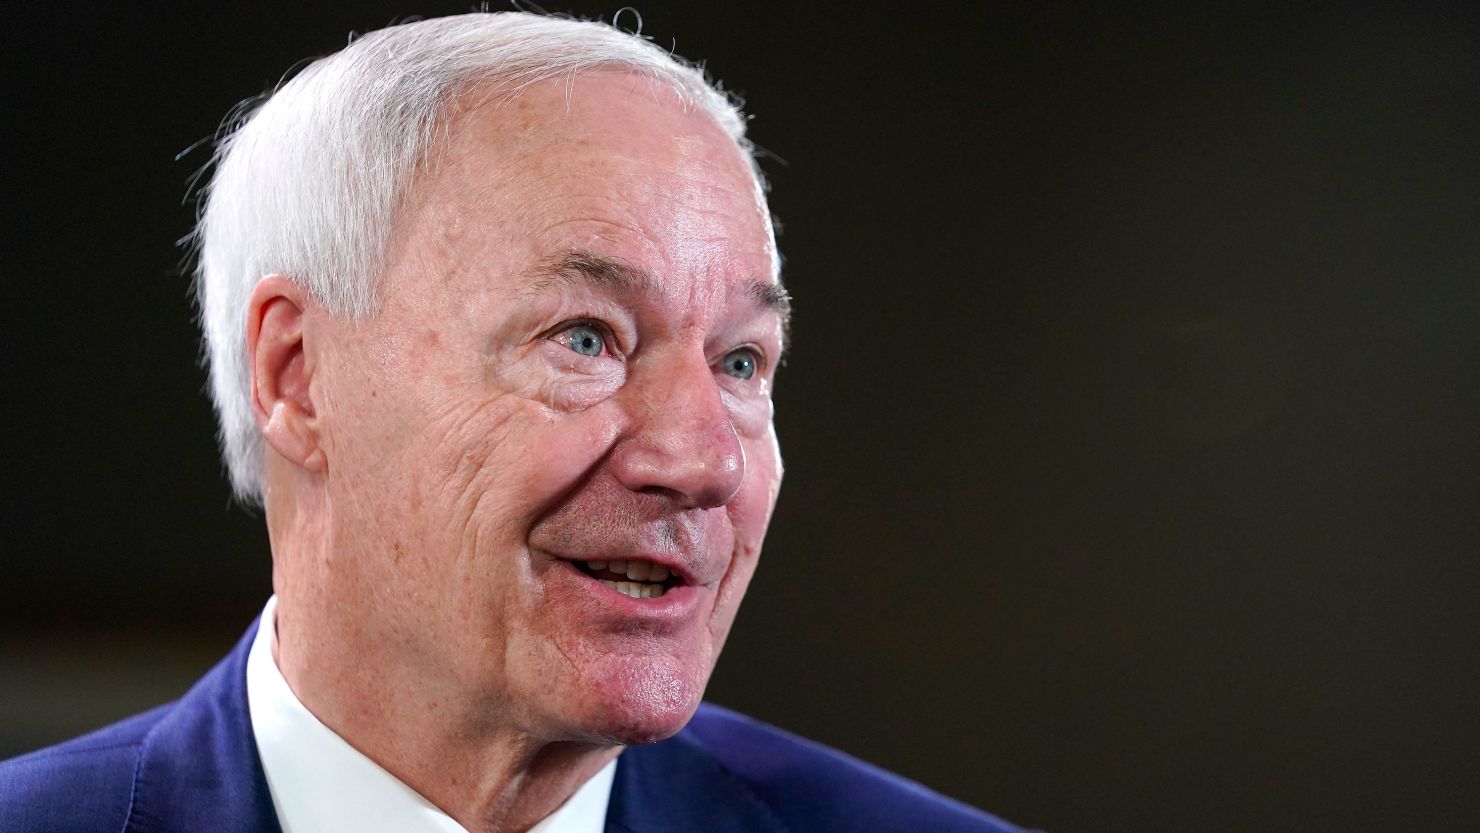 Asa Hutchinson is seen during an interview in Washington, DC, on December 13, 2022.